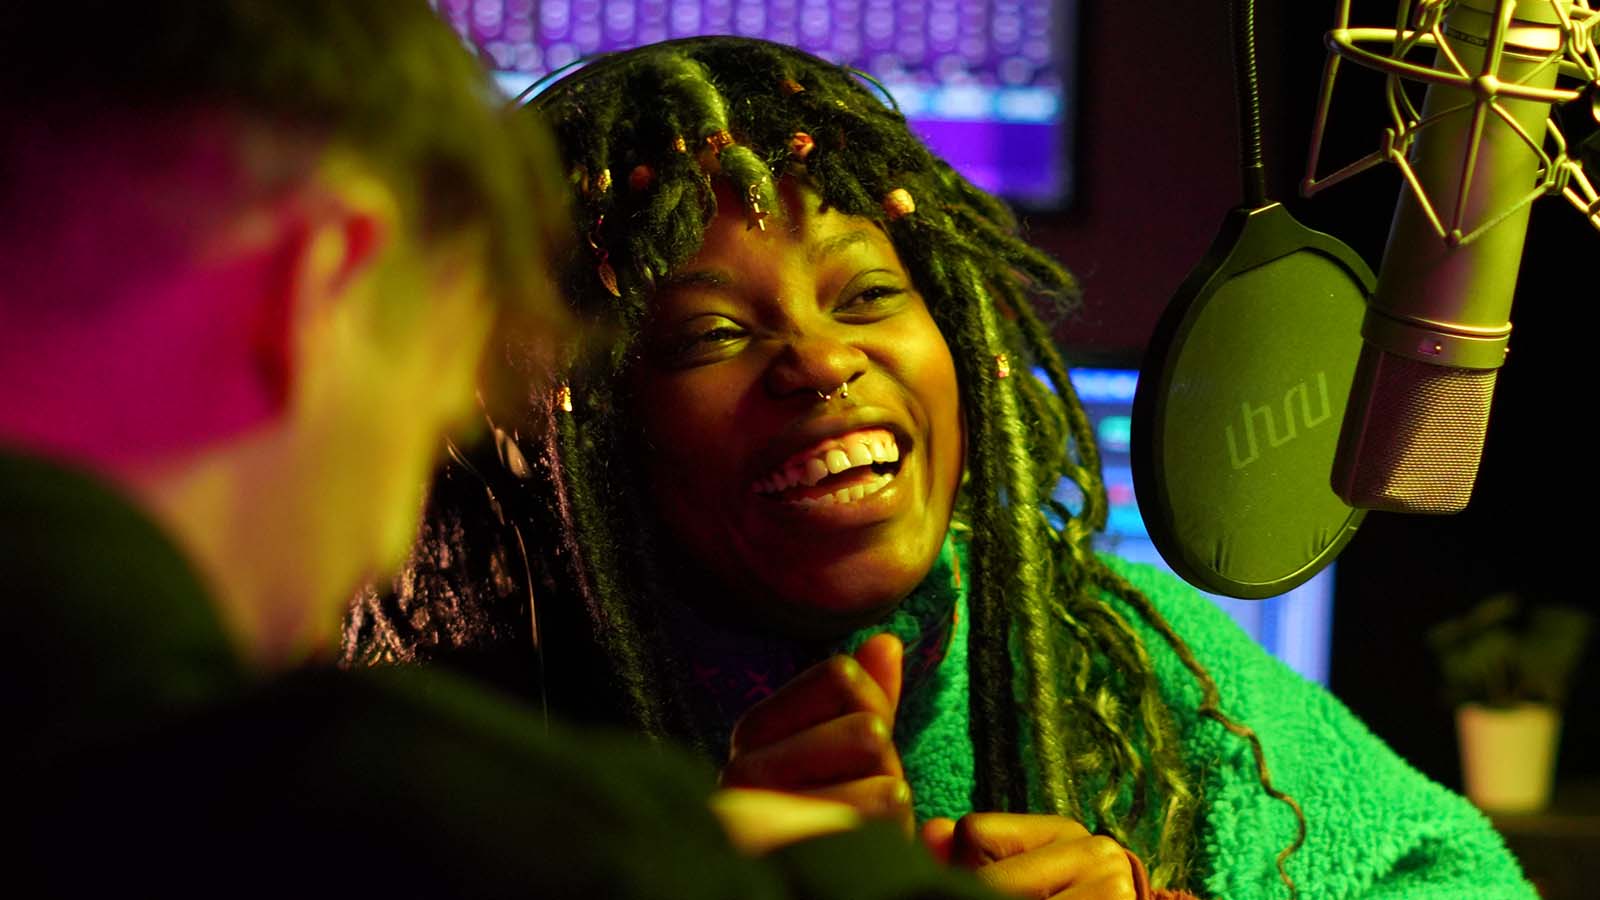 A young Black woman smiling, she is in a recording studio, with a professional microphone just in front of her